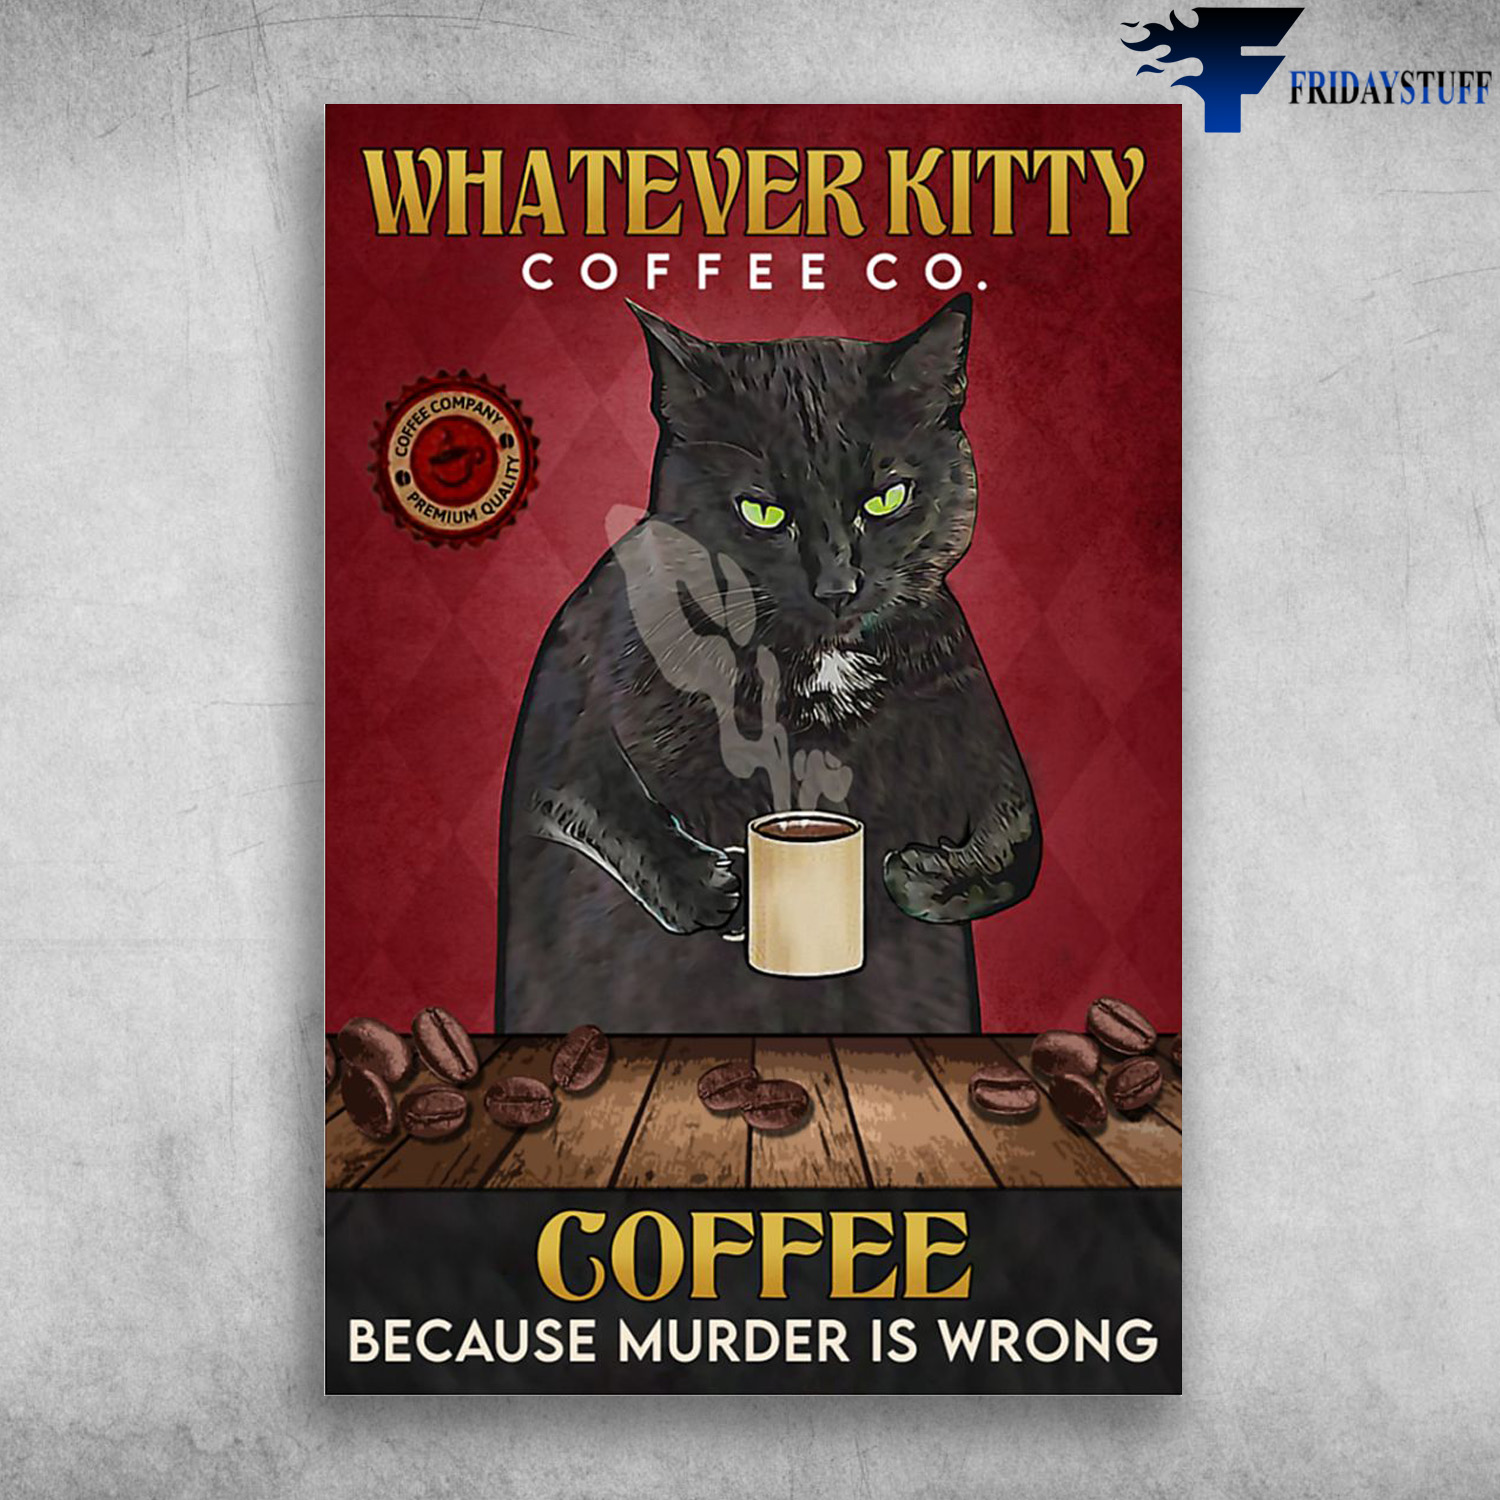 Black Cat Coffee - Whatever Kitty, Coffee Co., Coffee Because Murder Is Wrong